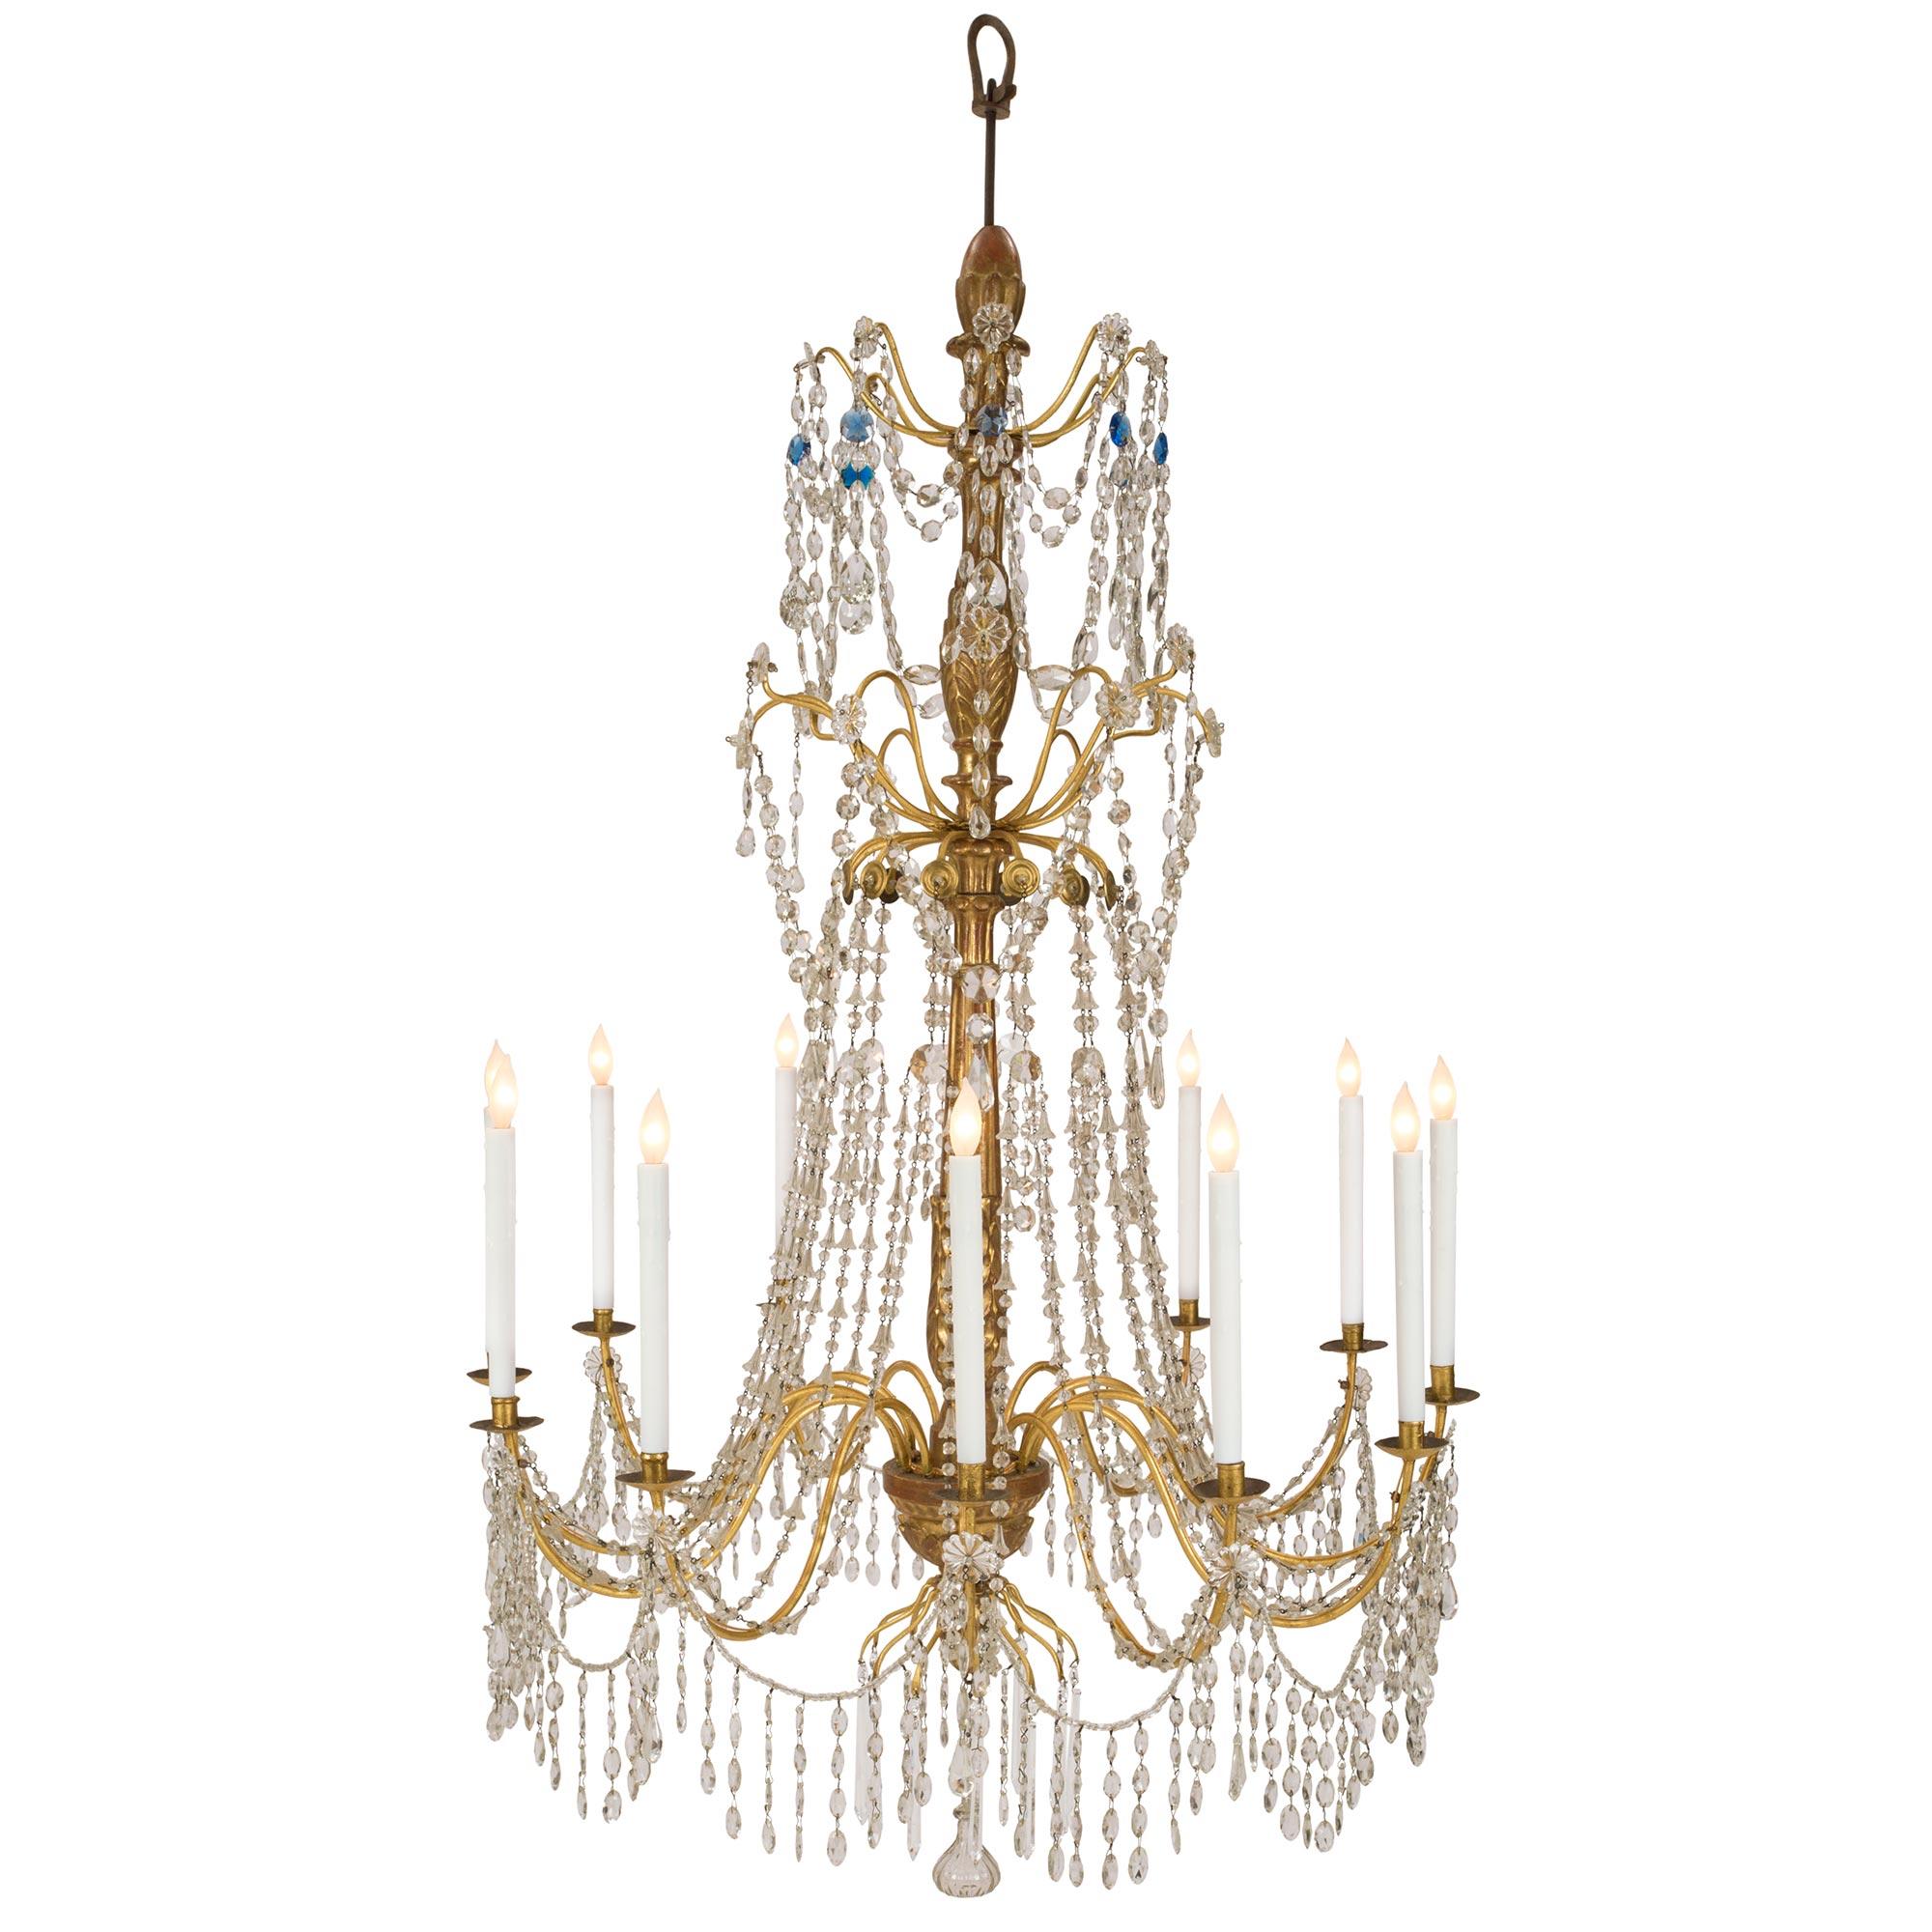 An impressive and large scale Italian 18th century giltwood and gilt iron chandelier with clear and blue colored crystals and glass garlands. The twelve scrolled gilt metal arms are decorated by crystal drops topped by rosettes and are joined by